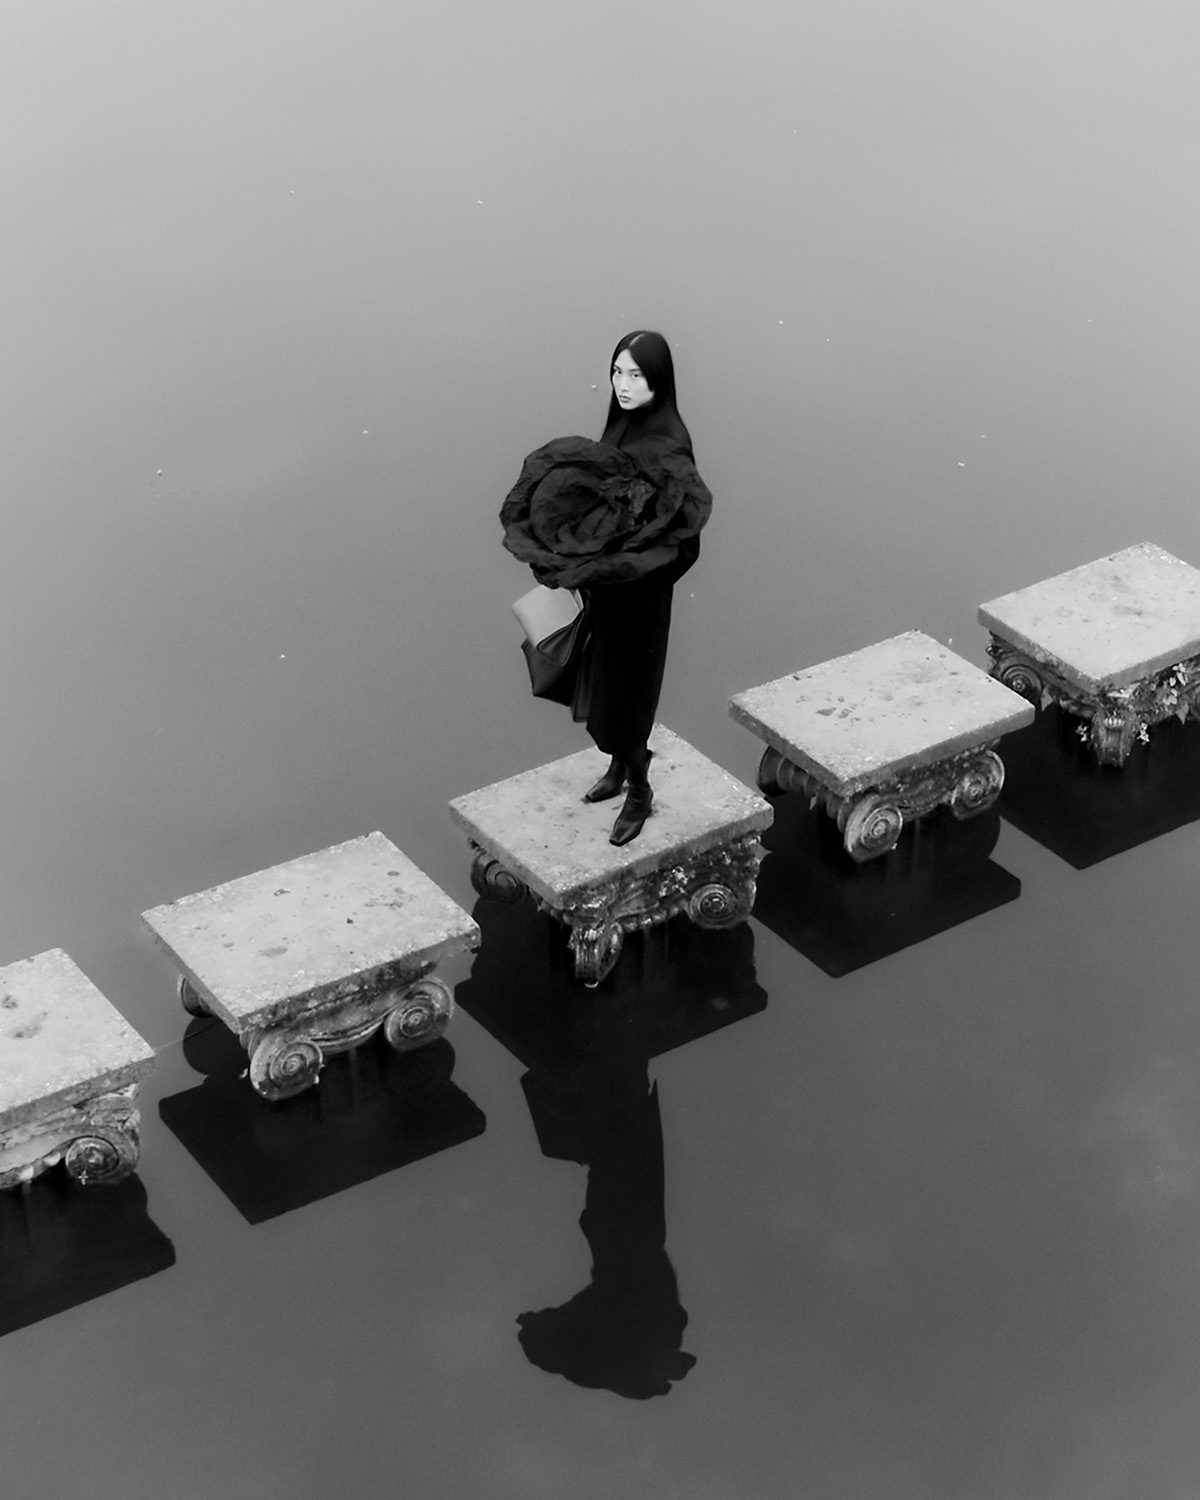 Black and white image by Agnes Lloyd-Platt shows a person wearing a garment in the shape of a flower head, stood in the middle of a row of square steps leading over water